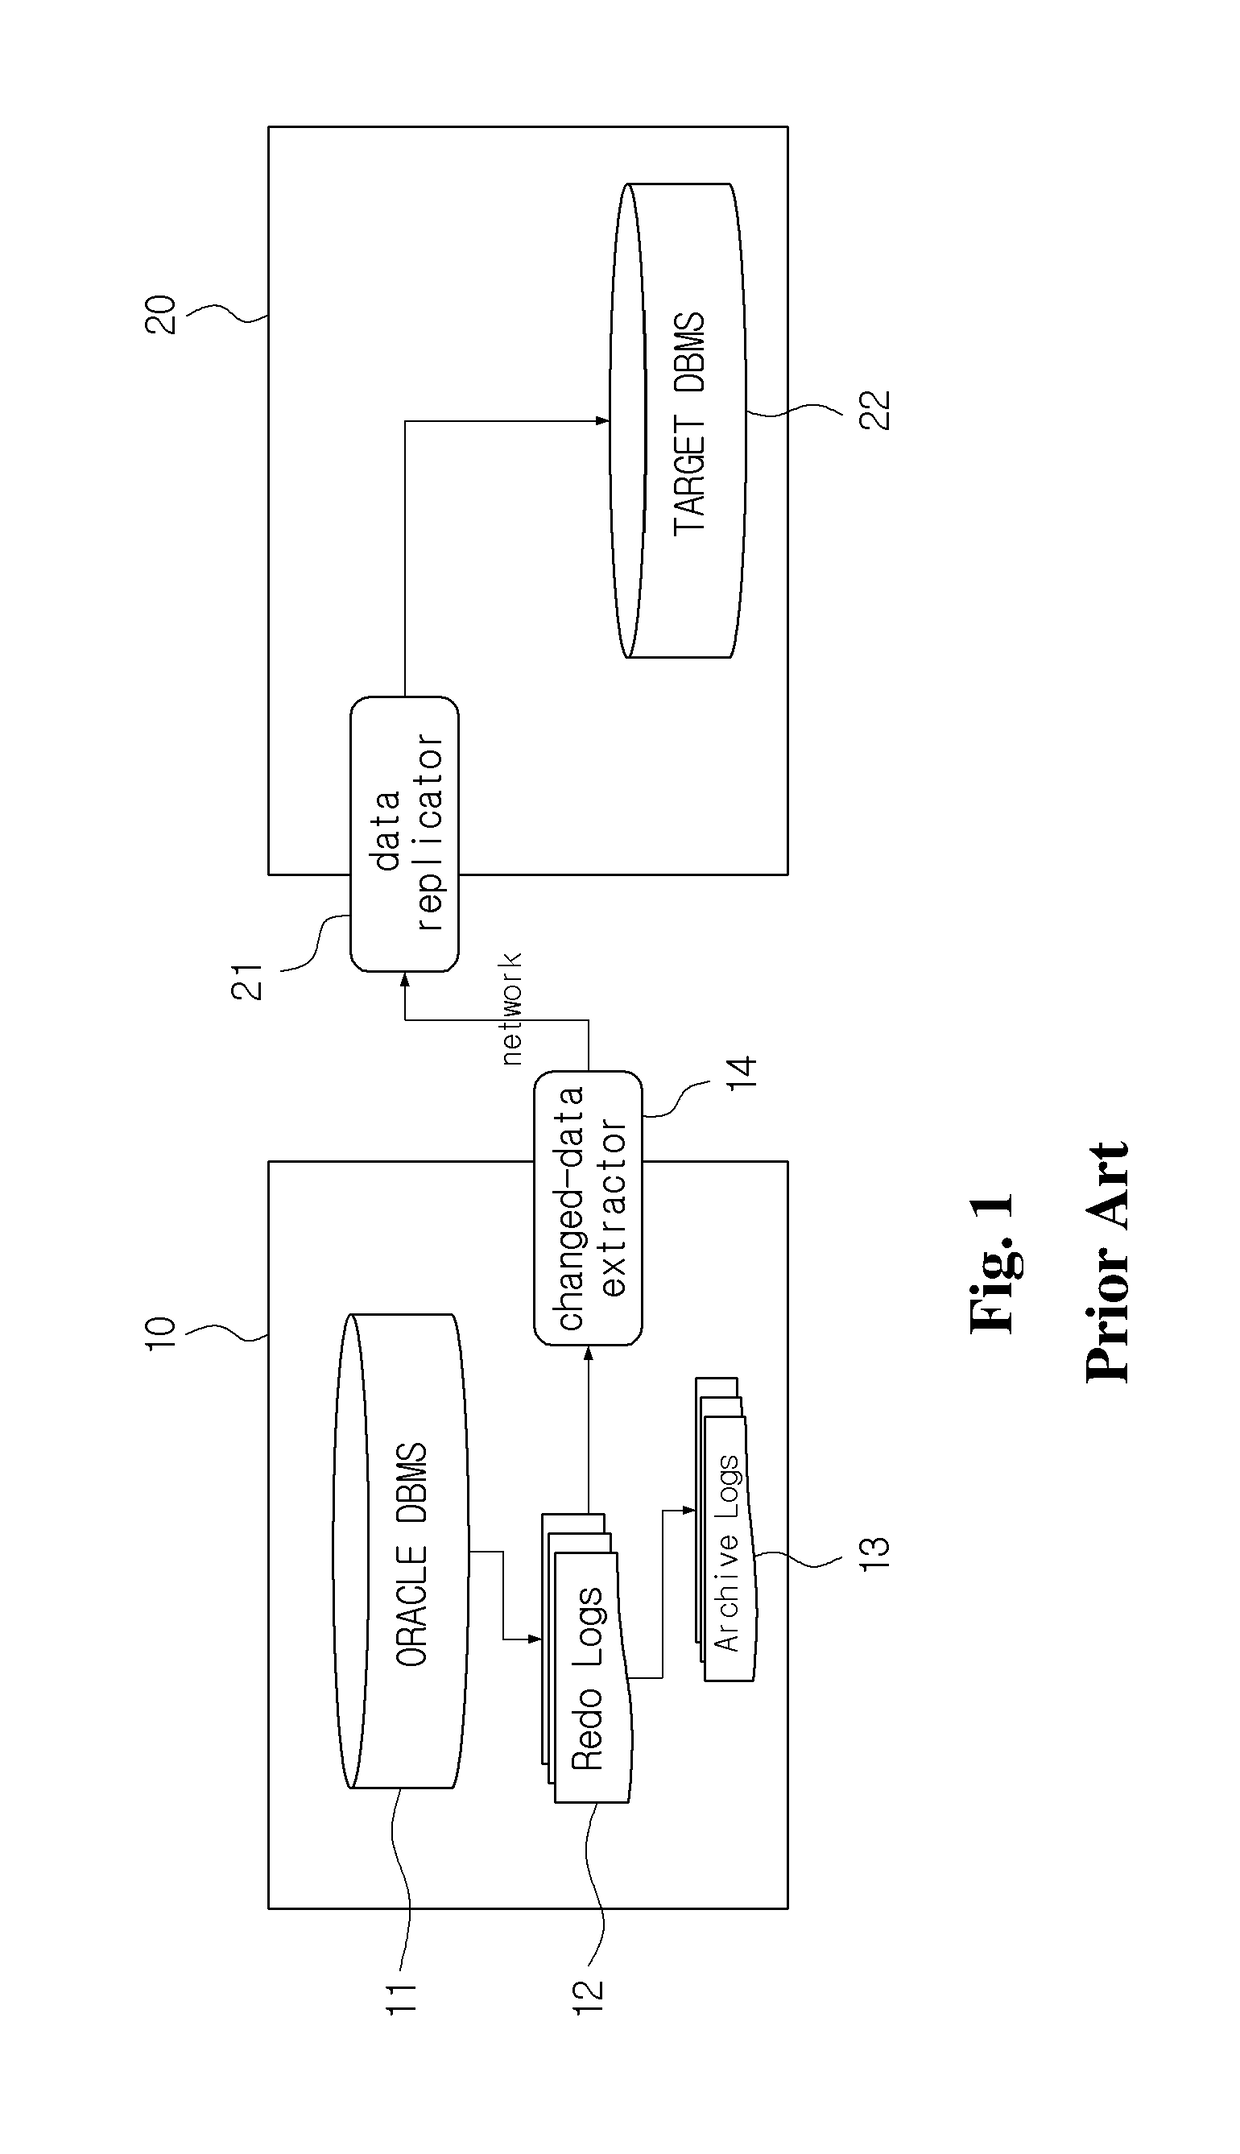 Apparatus and method for replicating changed-data in source database management system to target database management system in real time